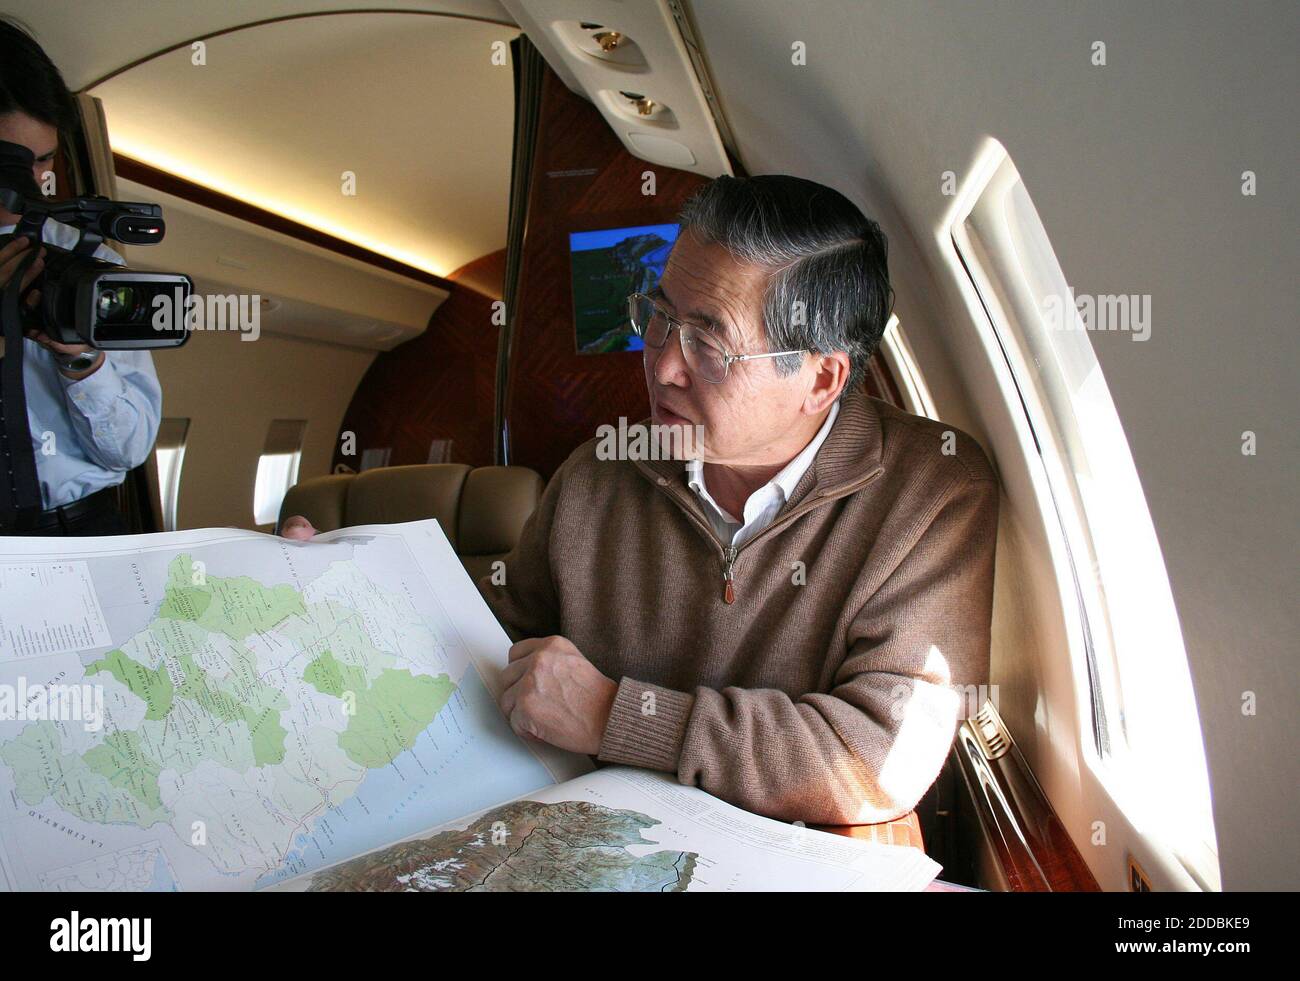 NO FILM, NO VIDEO, NO TV, NO DOCUMENTARY - Former president of Peru Alberto Fujimori is shown November 6, 2005, as he studies a map on an airplane of the border between Chile and Peru. Fujimori was arrested by Chilean authorities on his arrival. Photo by KRT/ABACAPRESS.COM Stock Photo